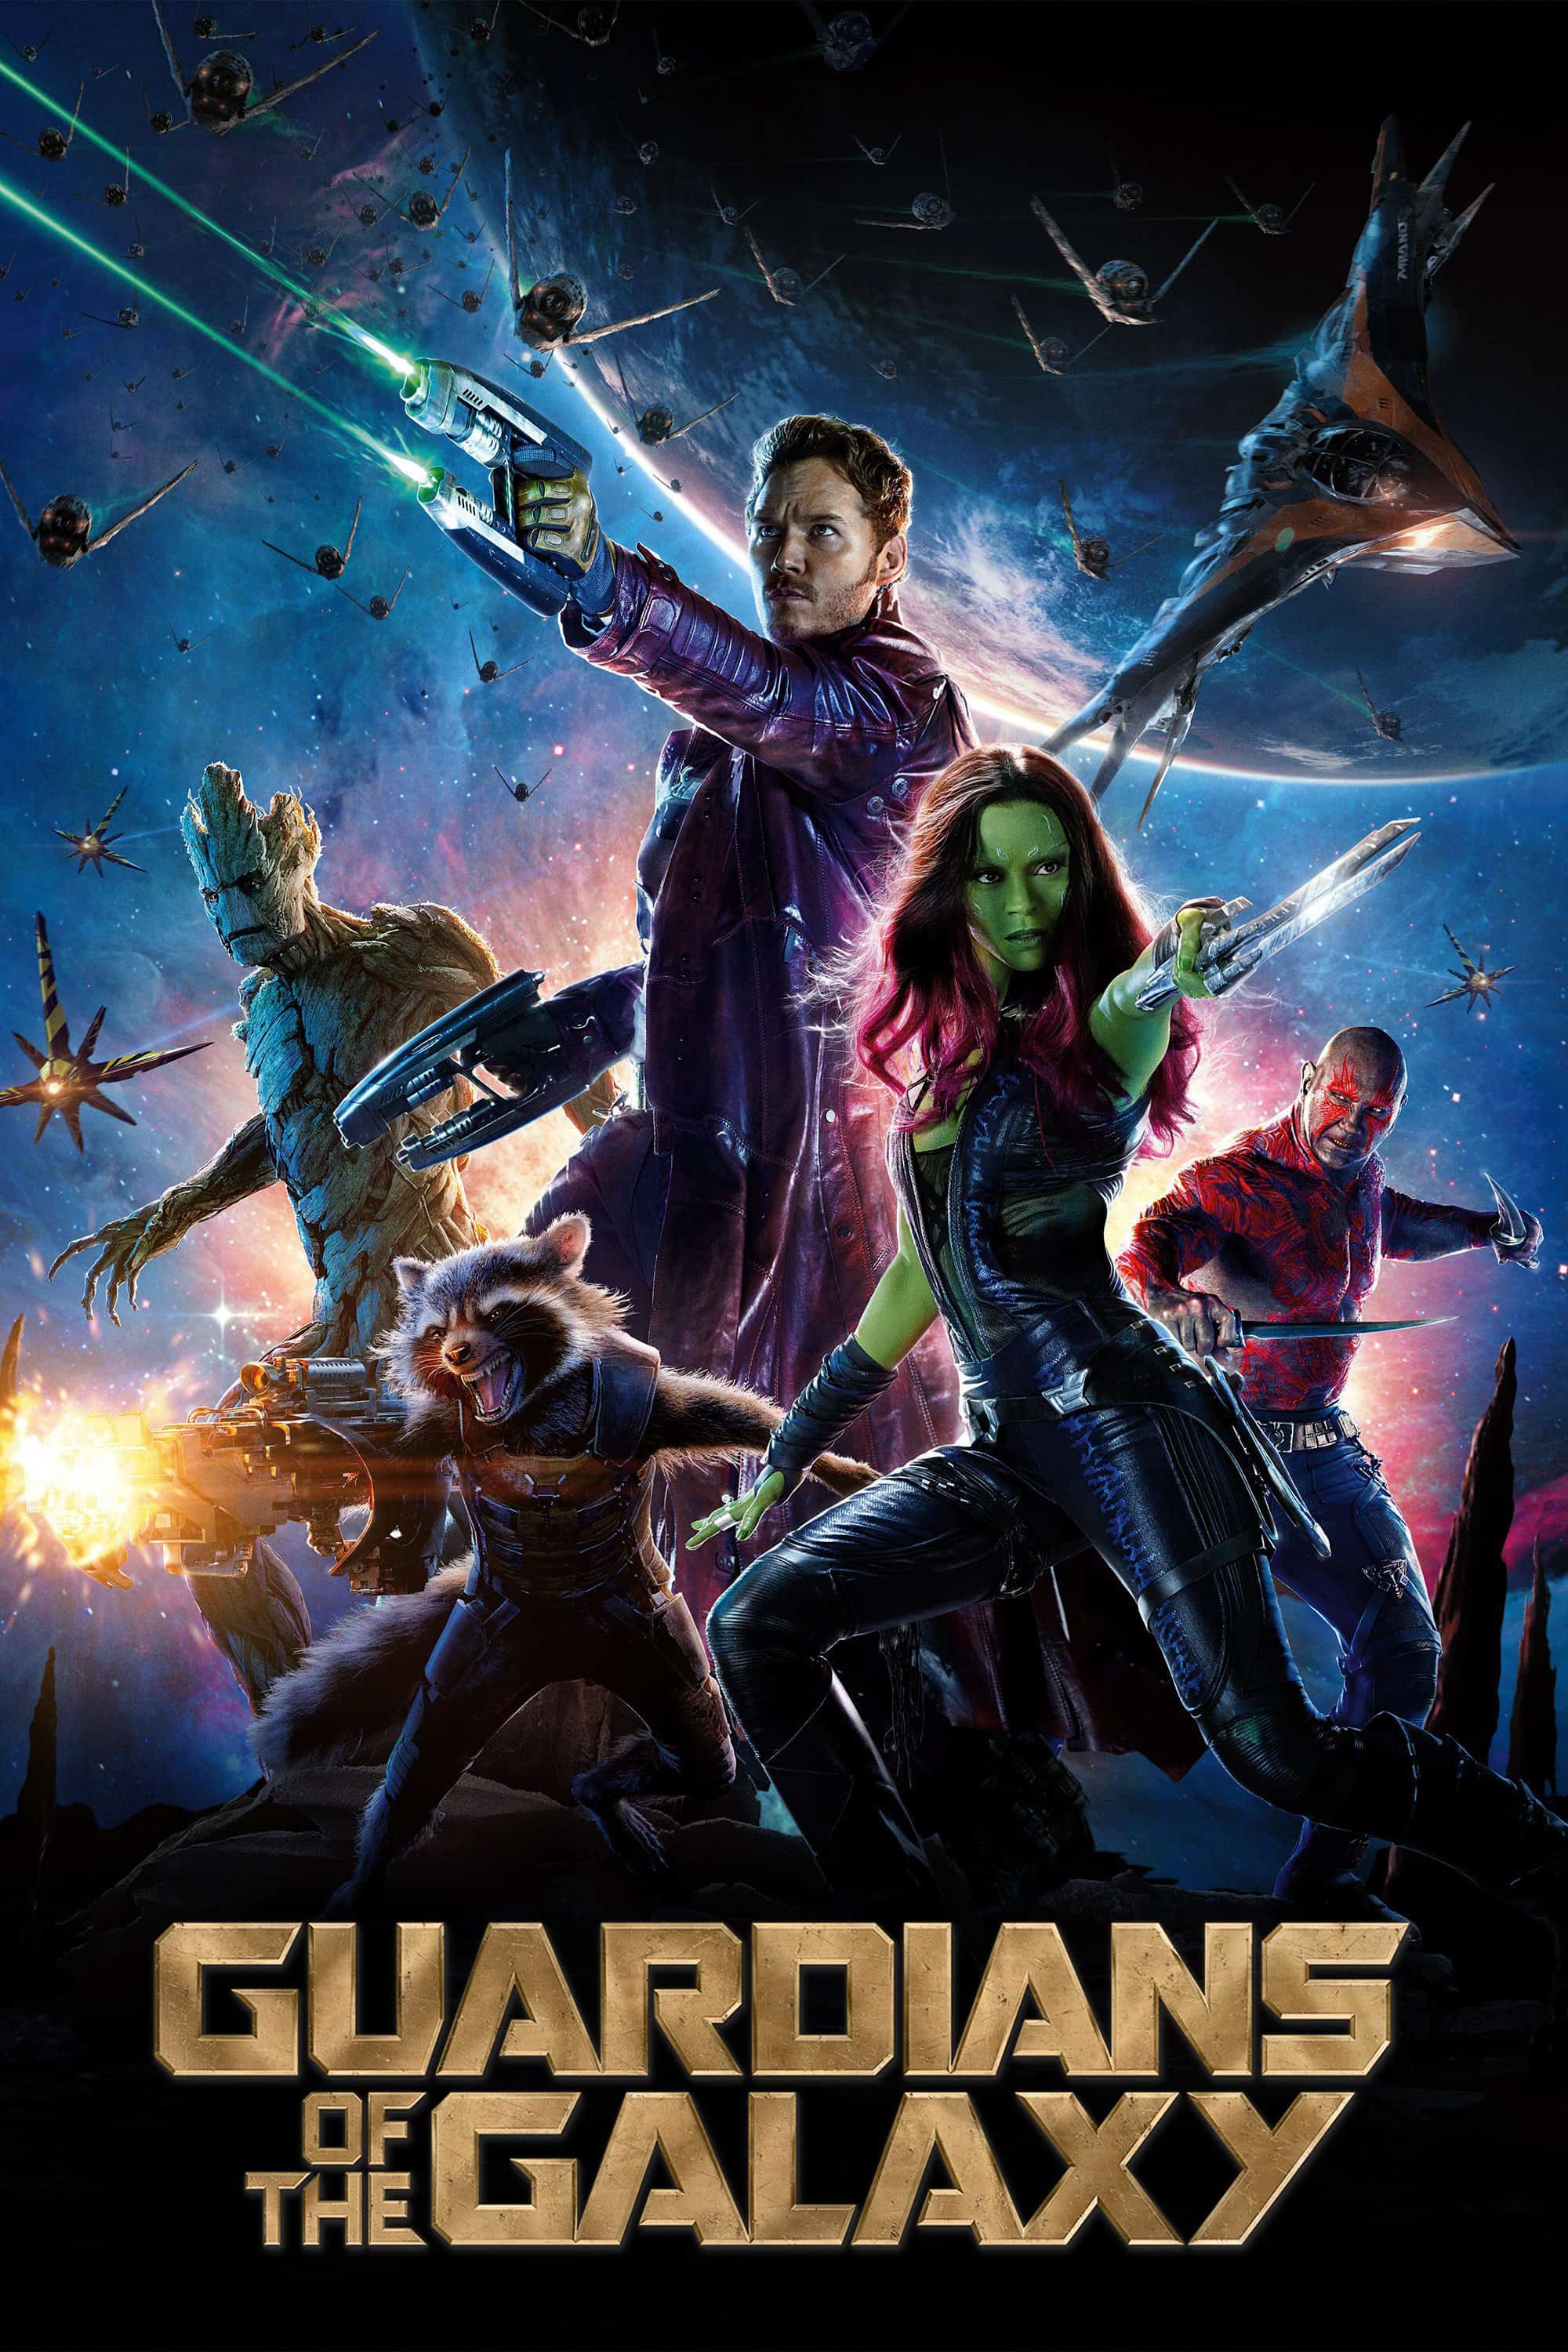 Guardians of the Galaxy, 2014 